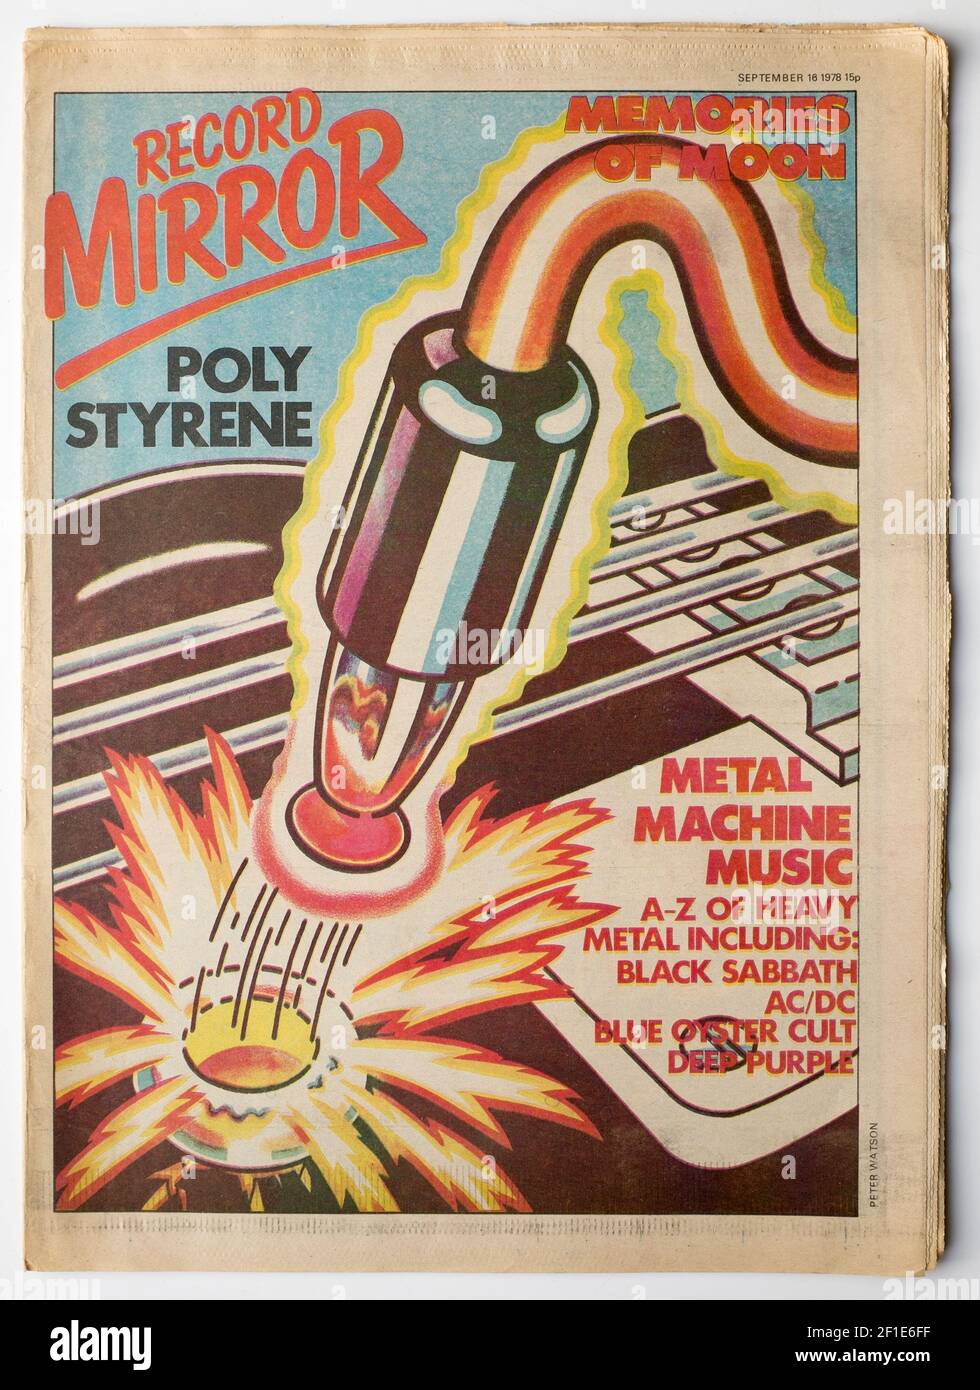 Old Vintage 1970s Edition of Record Mirror Pop Music Magazine Stock Photo